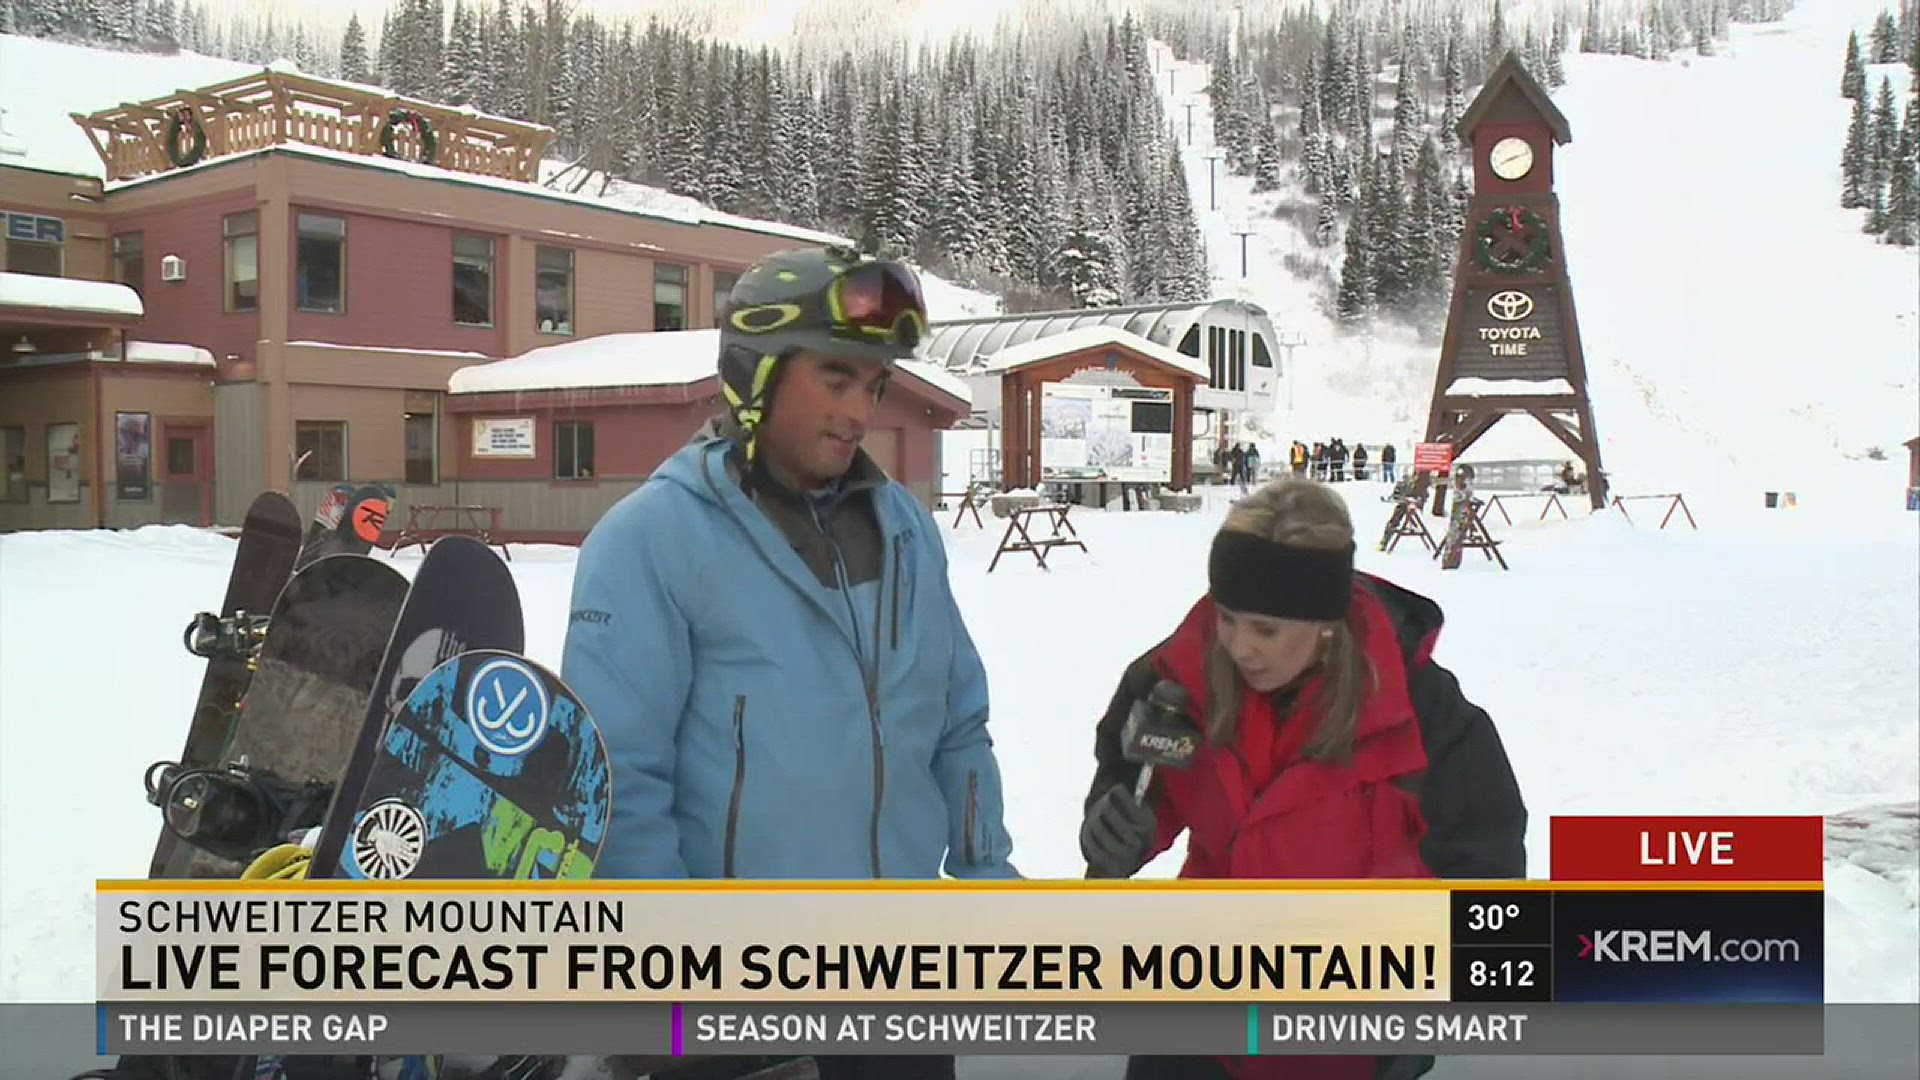 Skiers ready to hit the slopes at Schweitzer Mountain